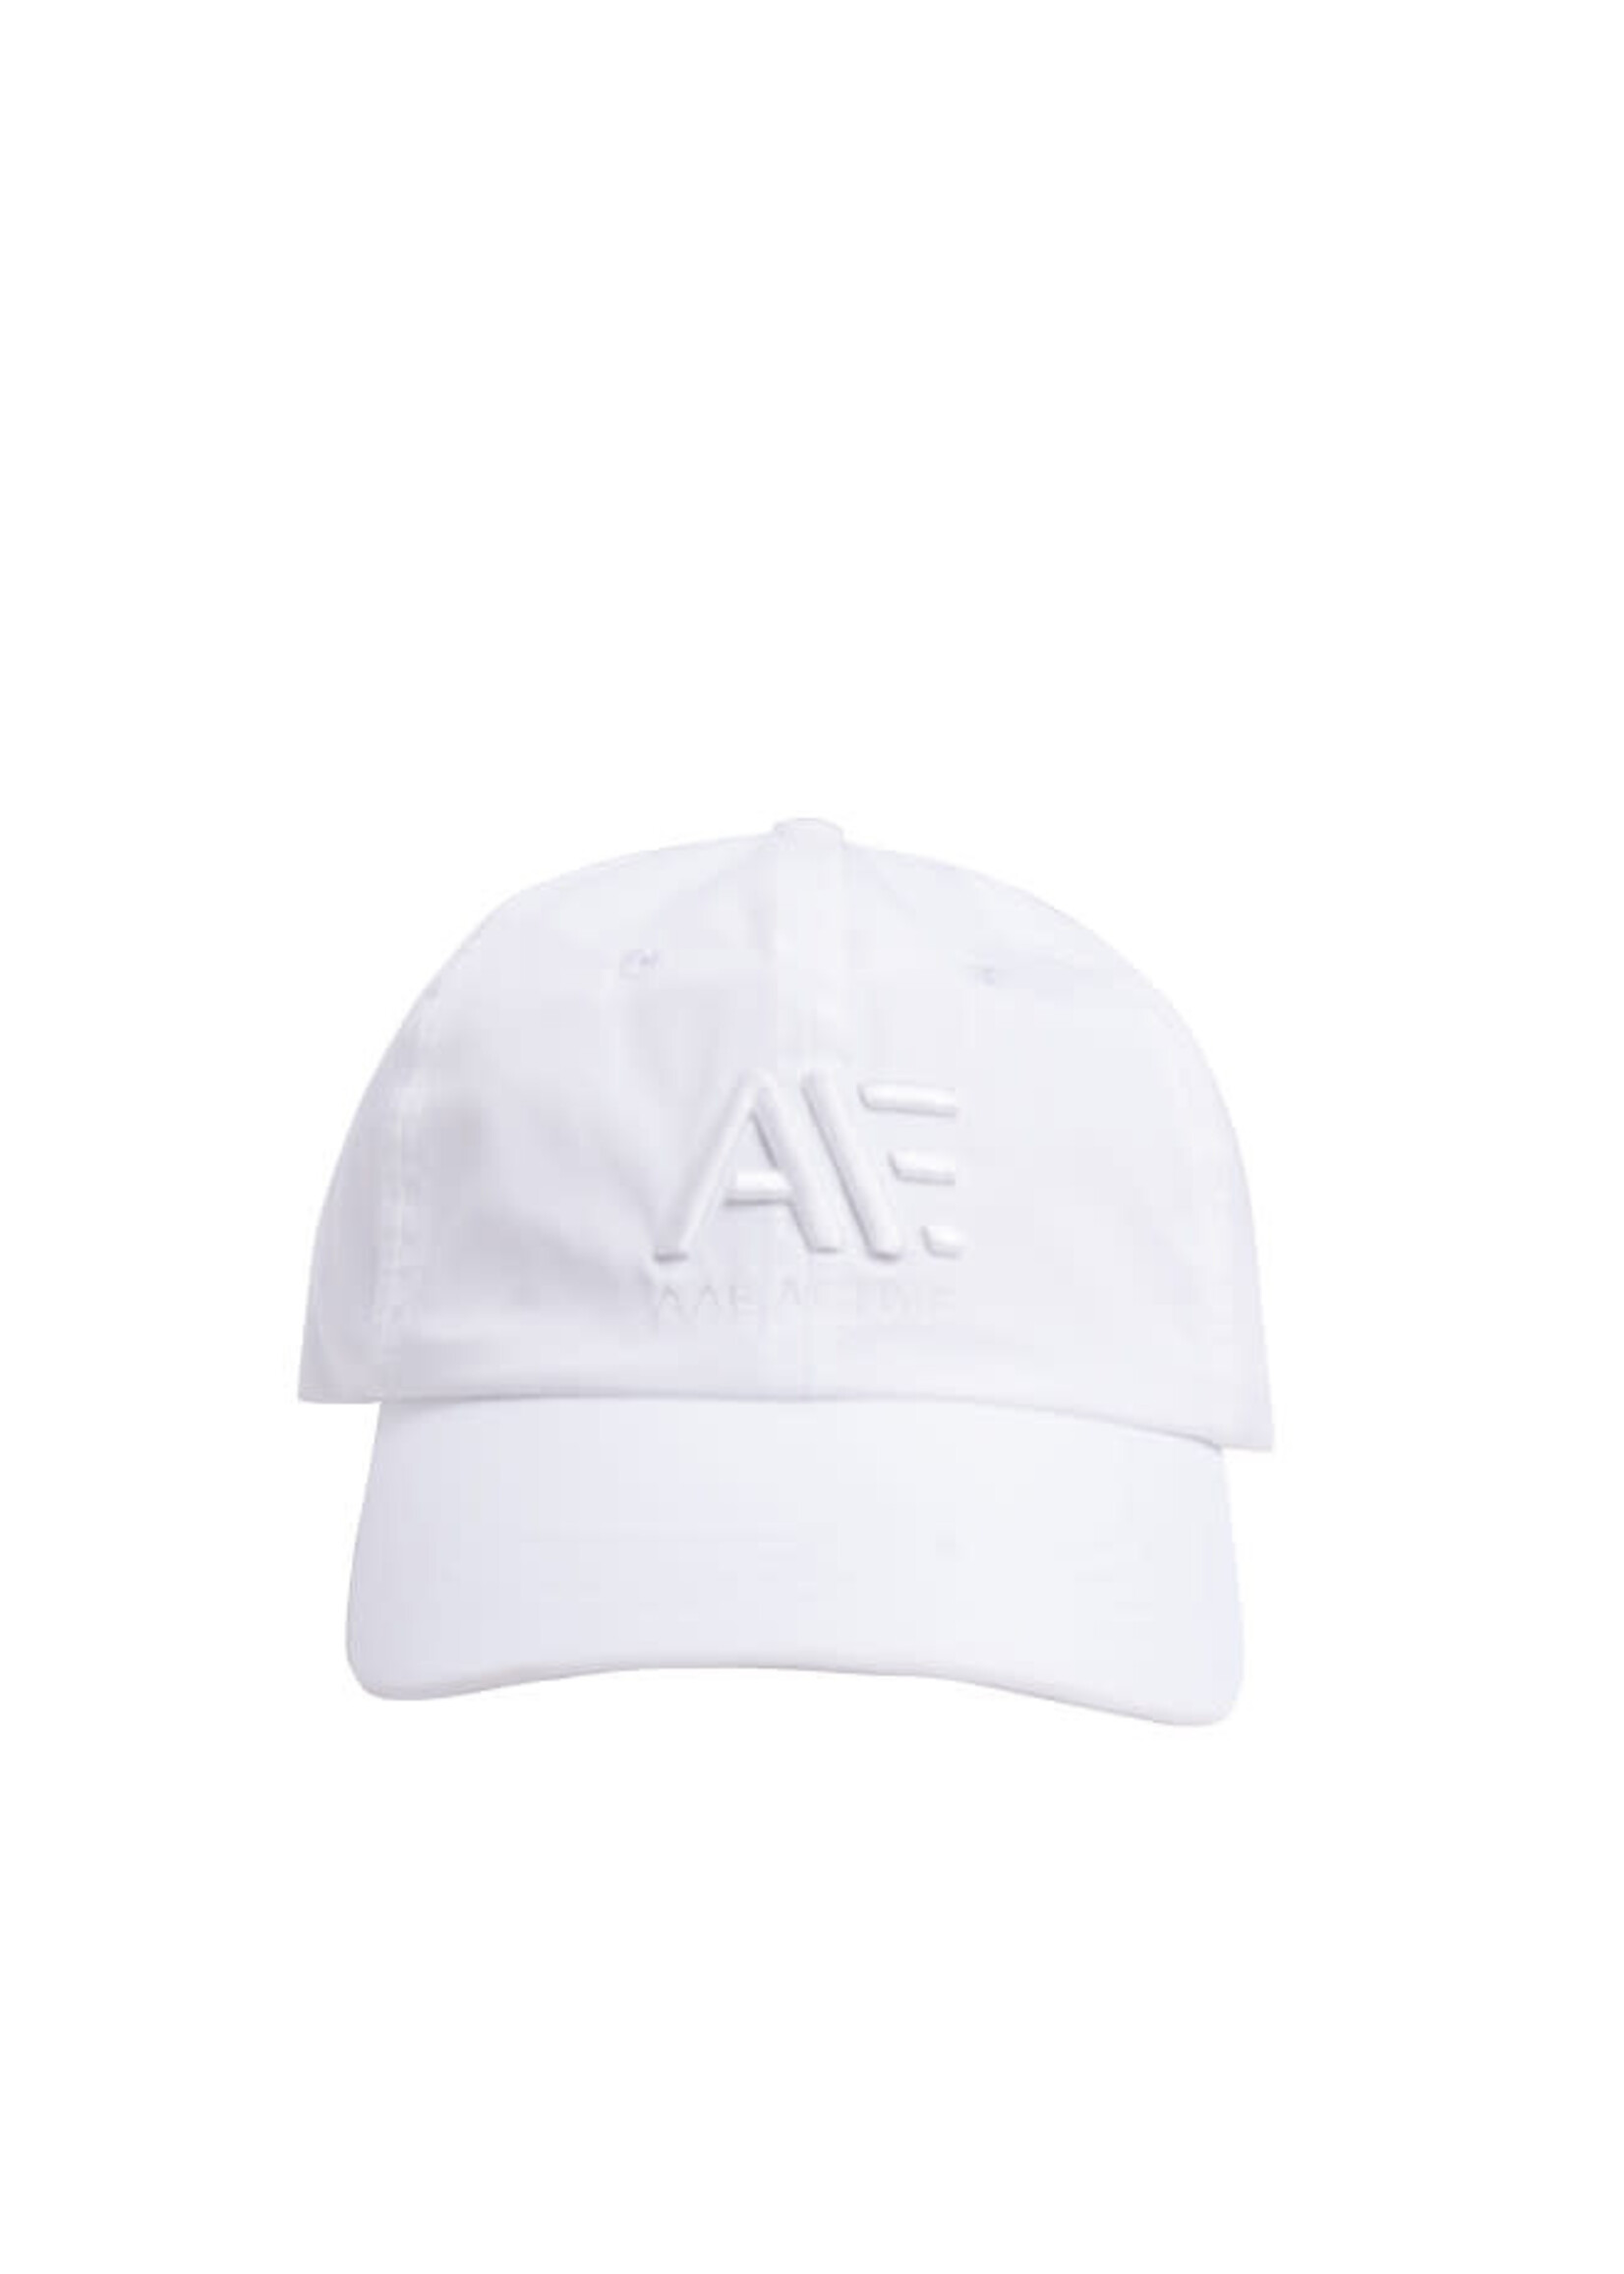 All About Eve AAE Cap